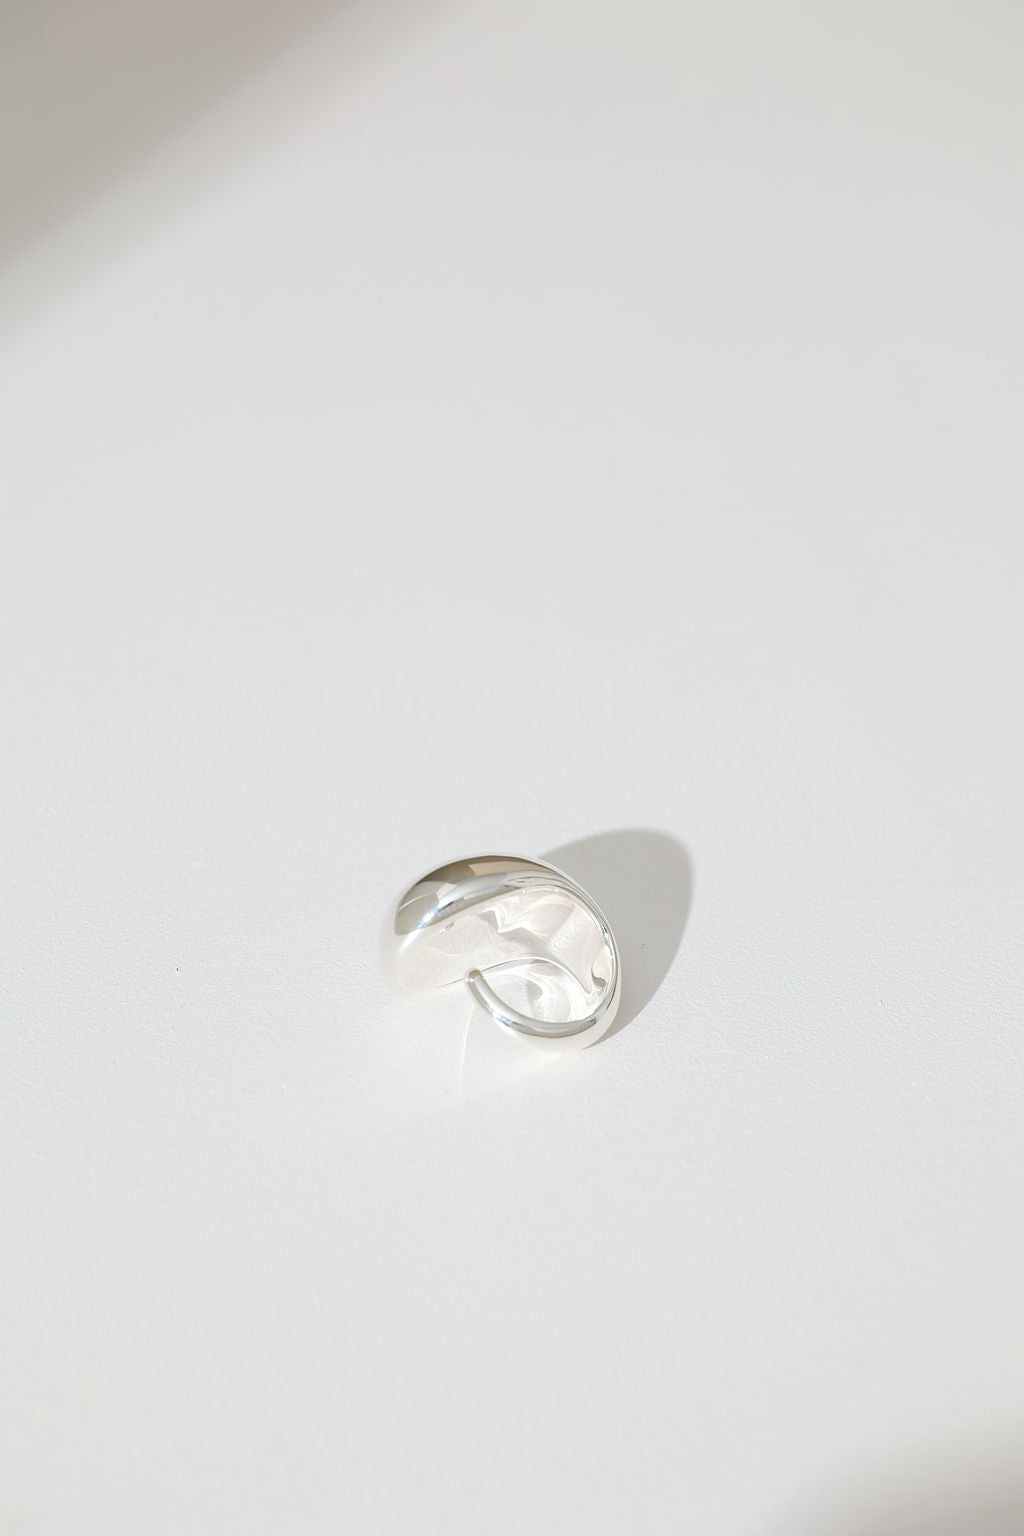 Large Tear Drop Hollow Form Ring